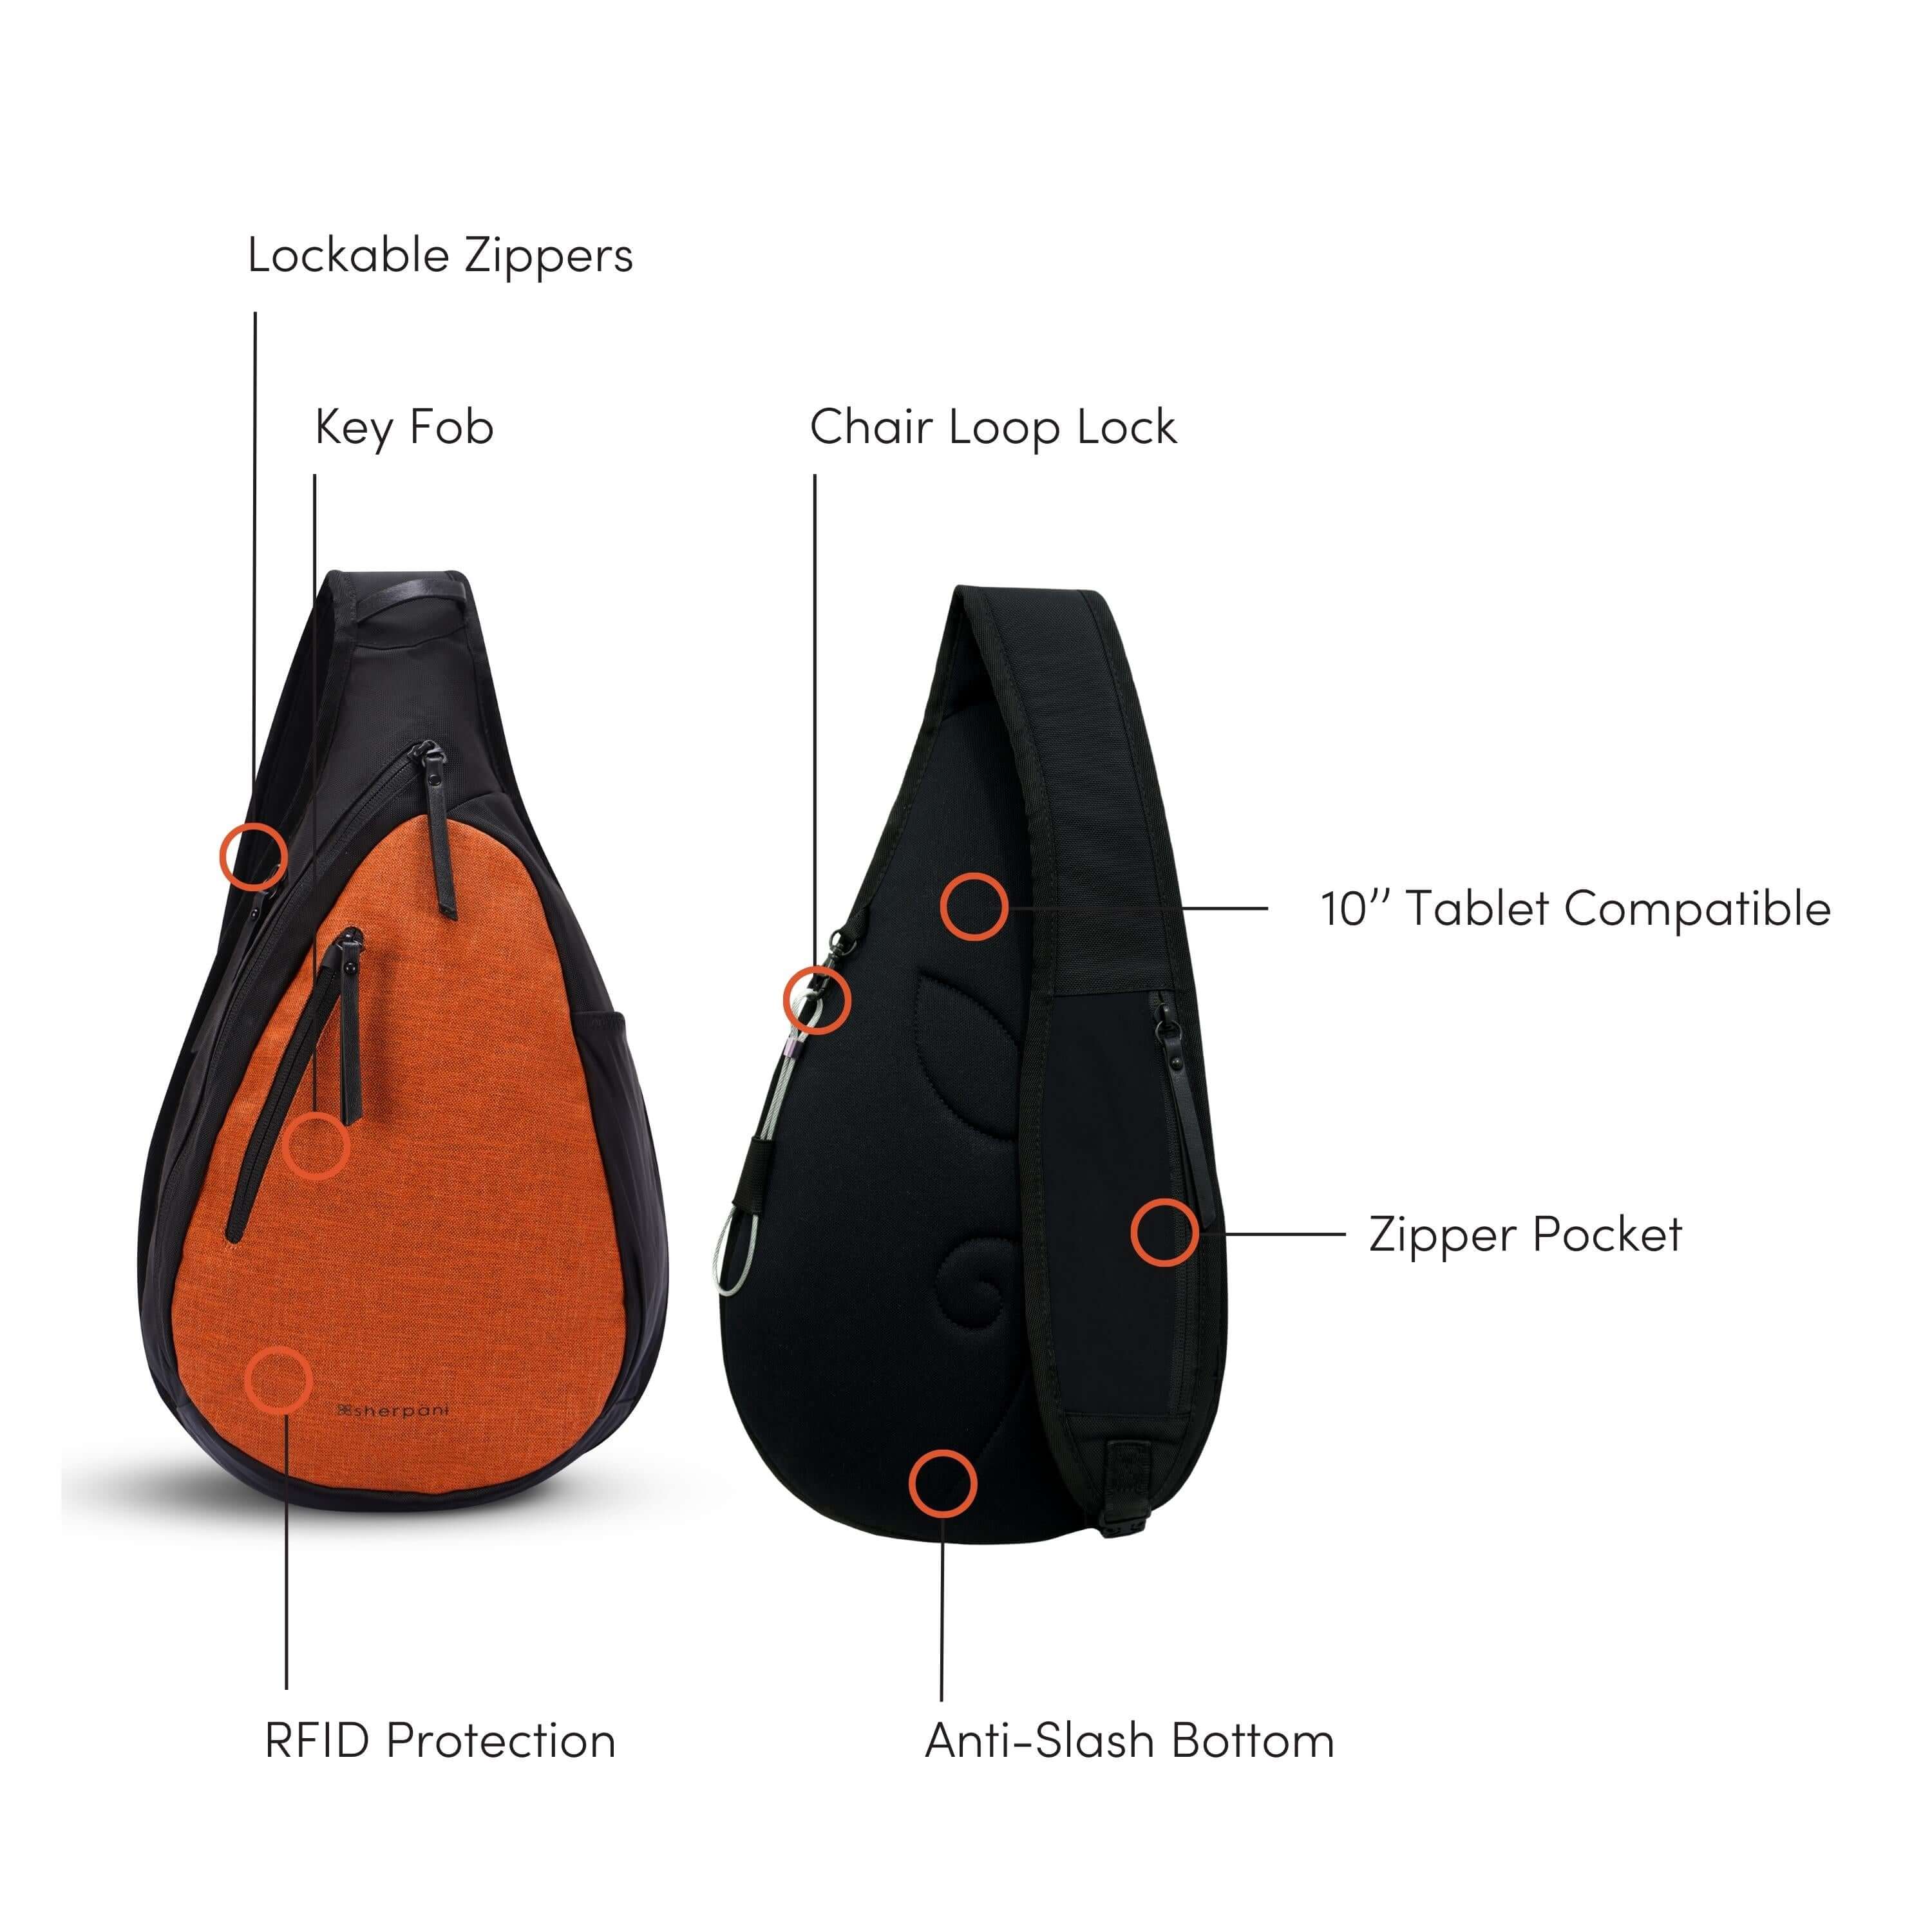 Graphic showcasing the features of Sherpani’s Anti Theft bag, the Esprit AT in Copper. There is a front and a back view of the bag, red circles highlight the following features: Lockable Zippers, Key Fob, Chair Loop Lock, 10” Tablet Compatible, Zipper Pocket, Anti-Slash Bottom, RFID Protection.